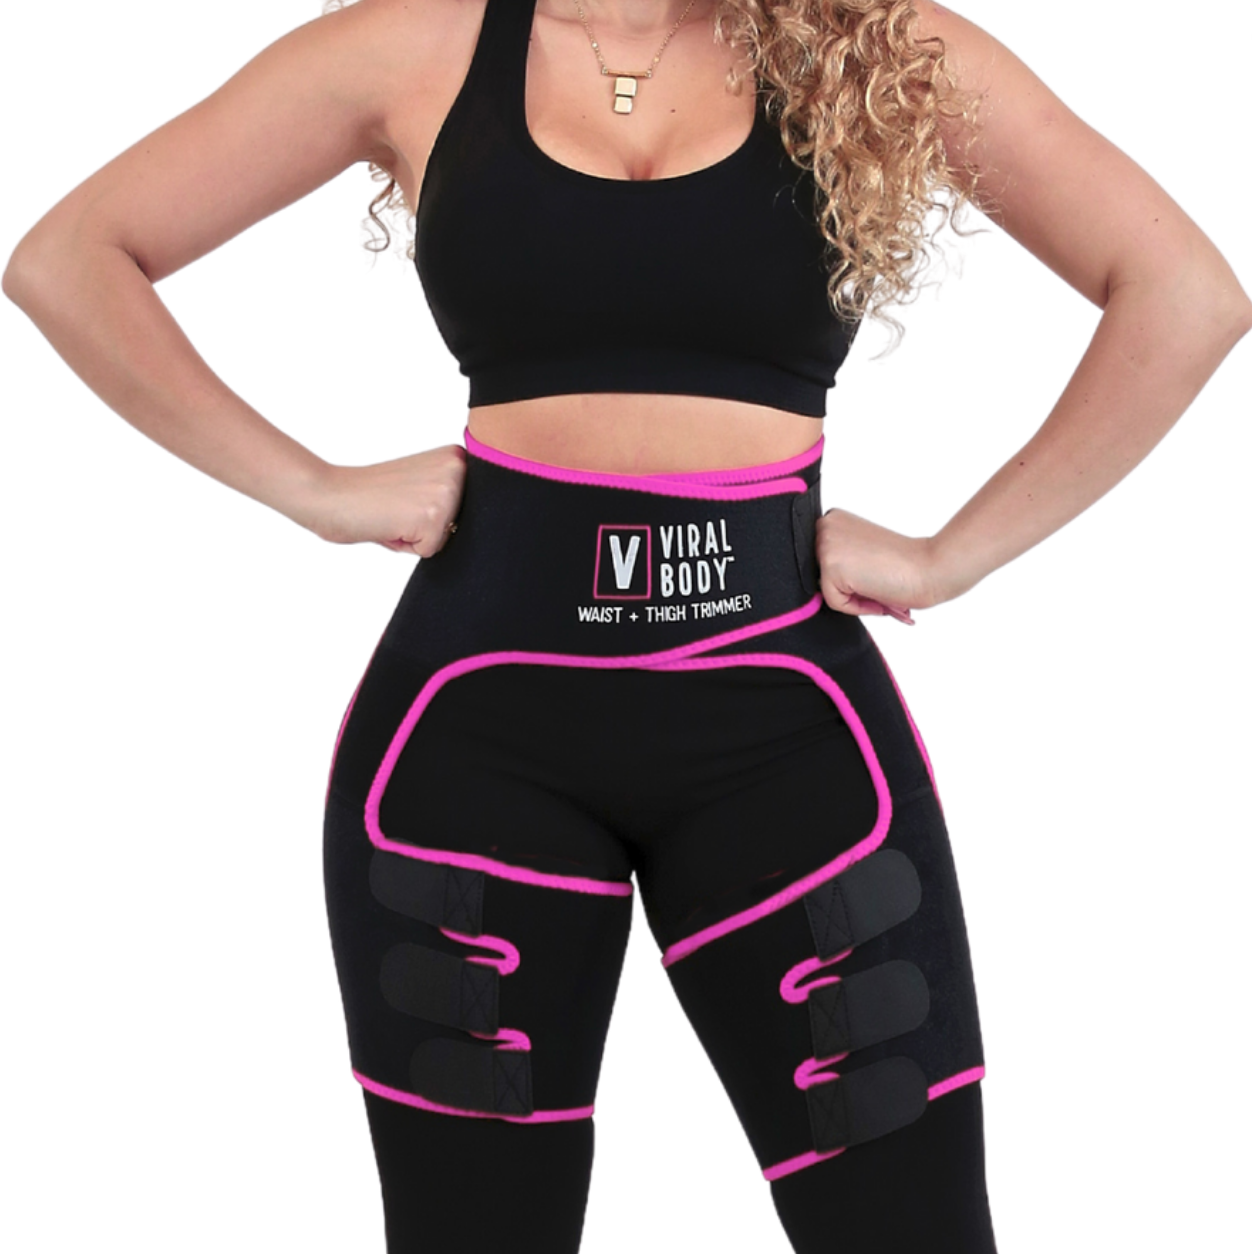 Viral Body® Premium 3-in-1 Waist and Thigh Trimmer with Butt Lifter